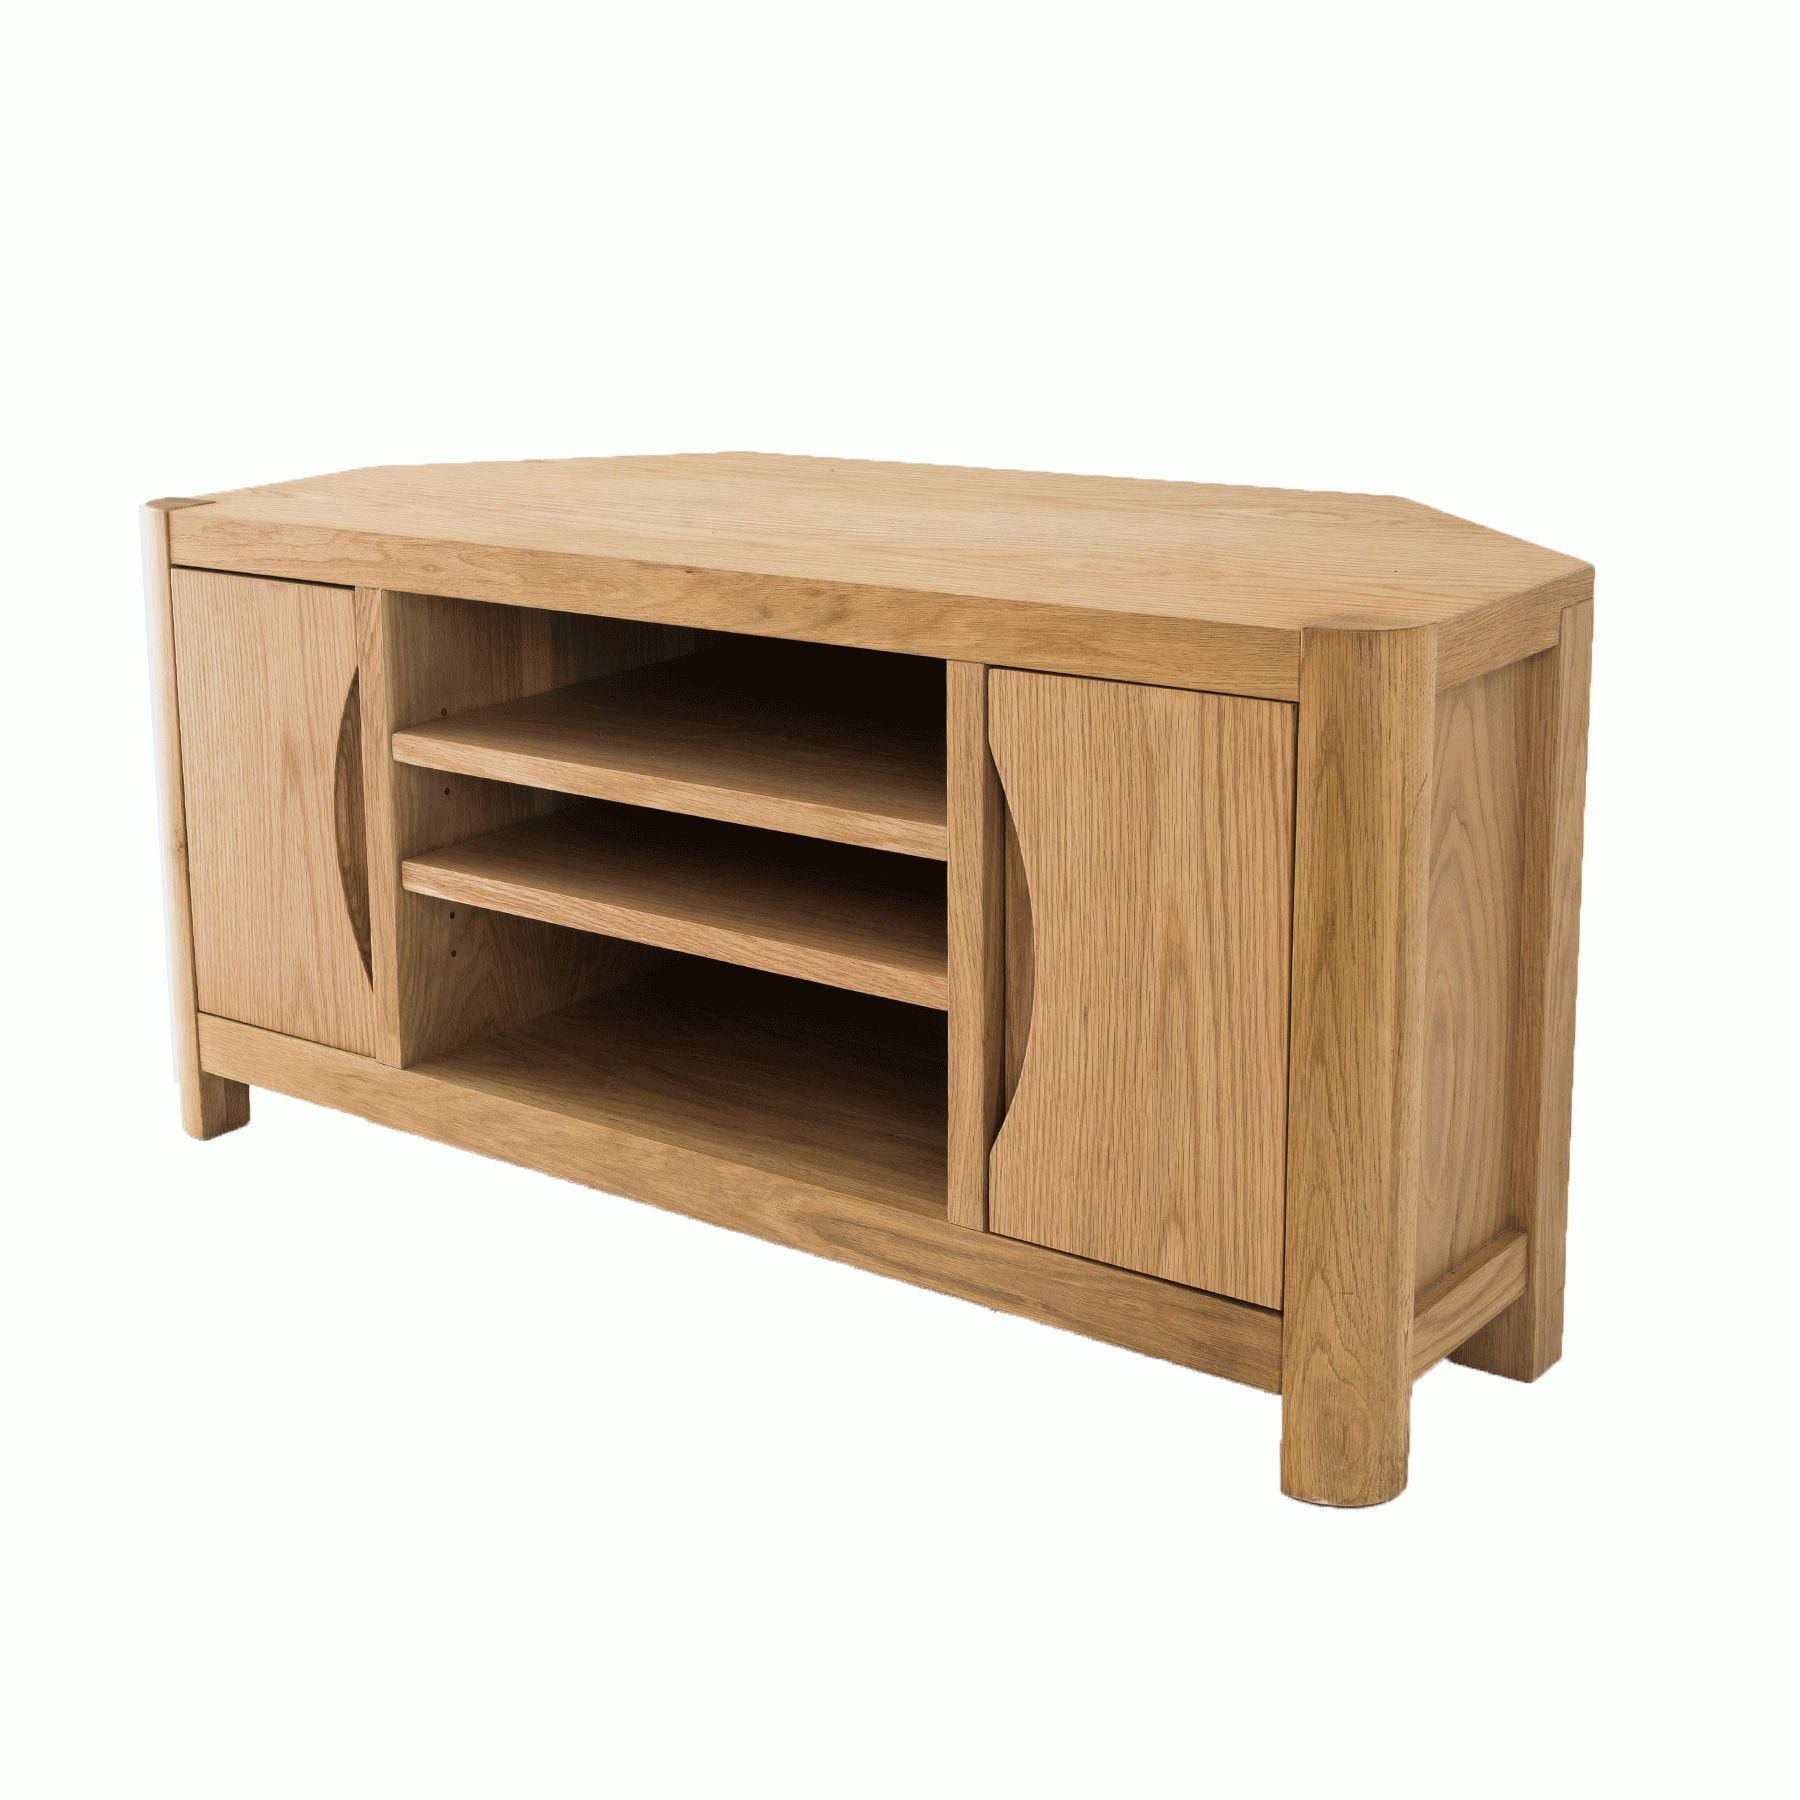 Oslo Light Oak Corner Tv Stand For Up To 44" Tvs In Well Known Light Oak Corner Tv Cabinets (Photo 5 of 20)